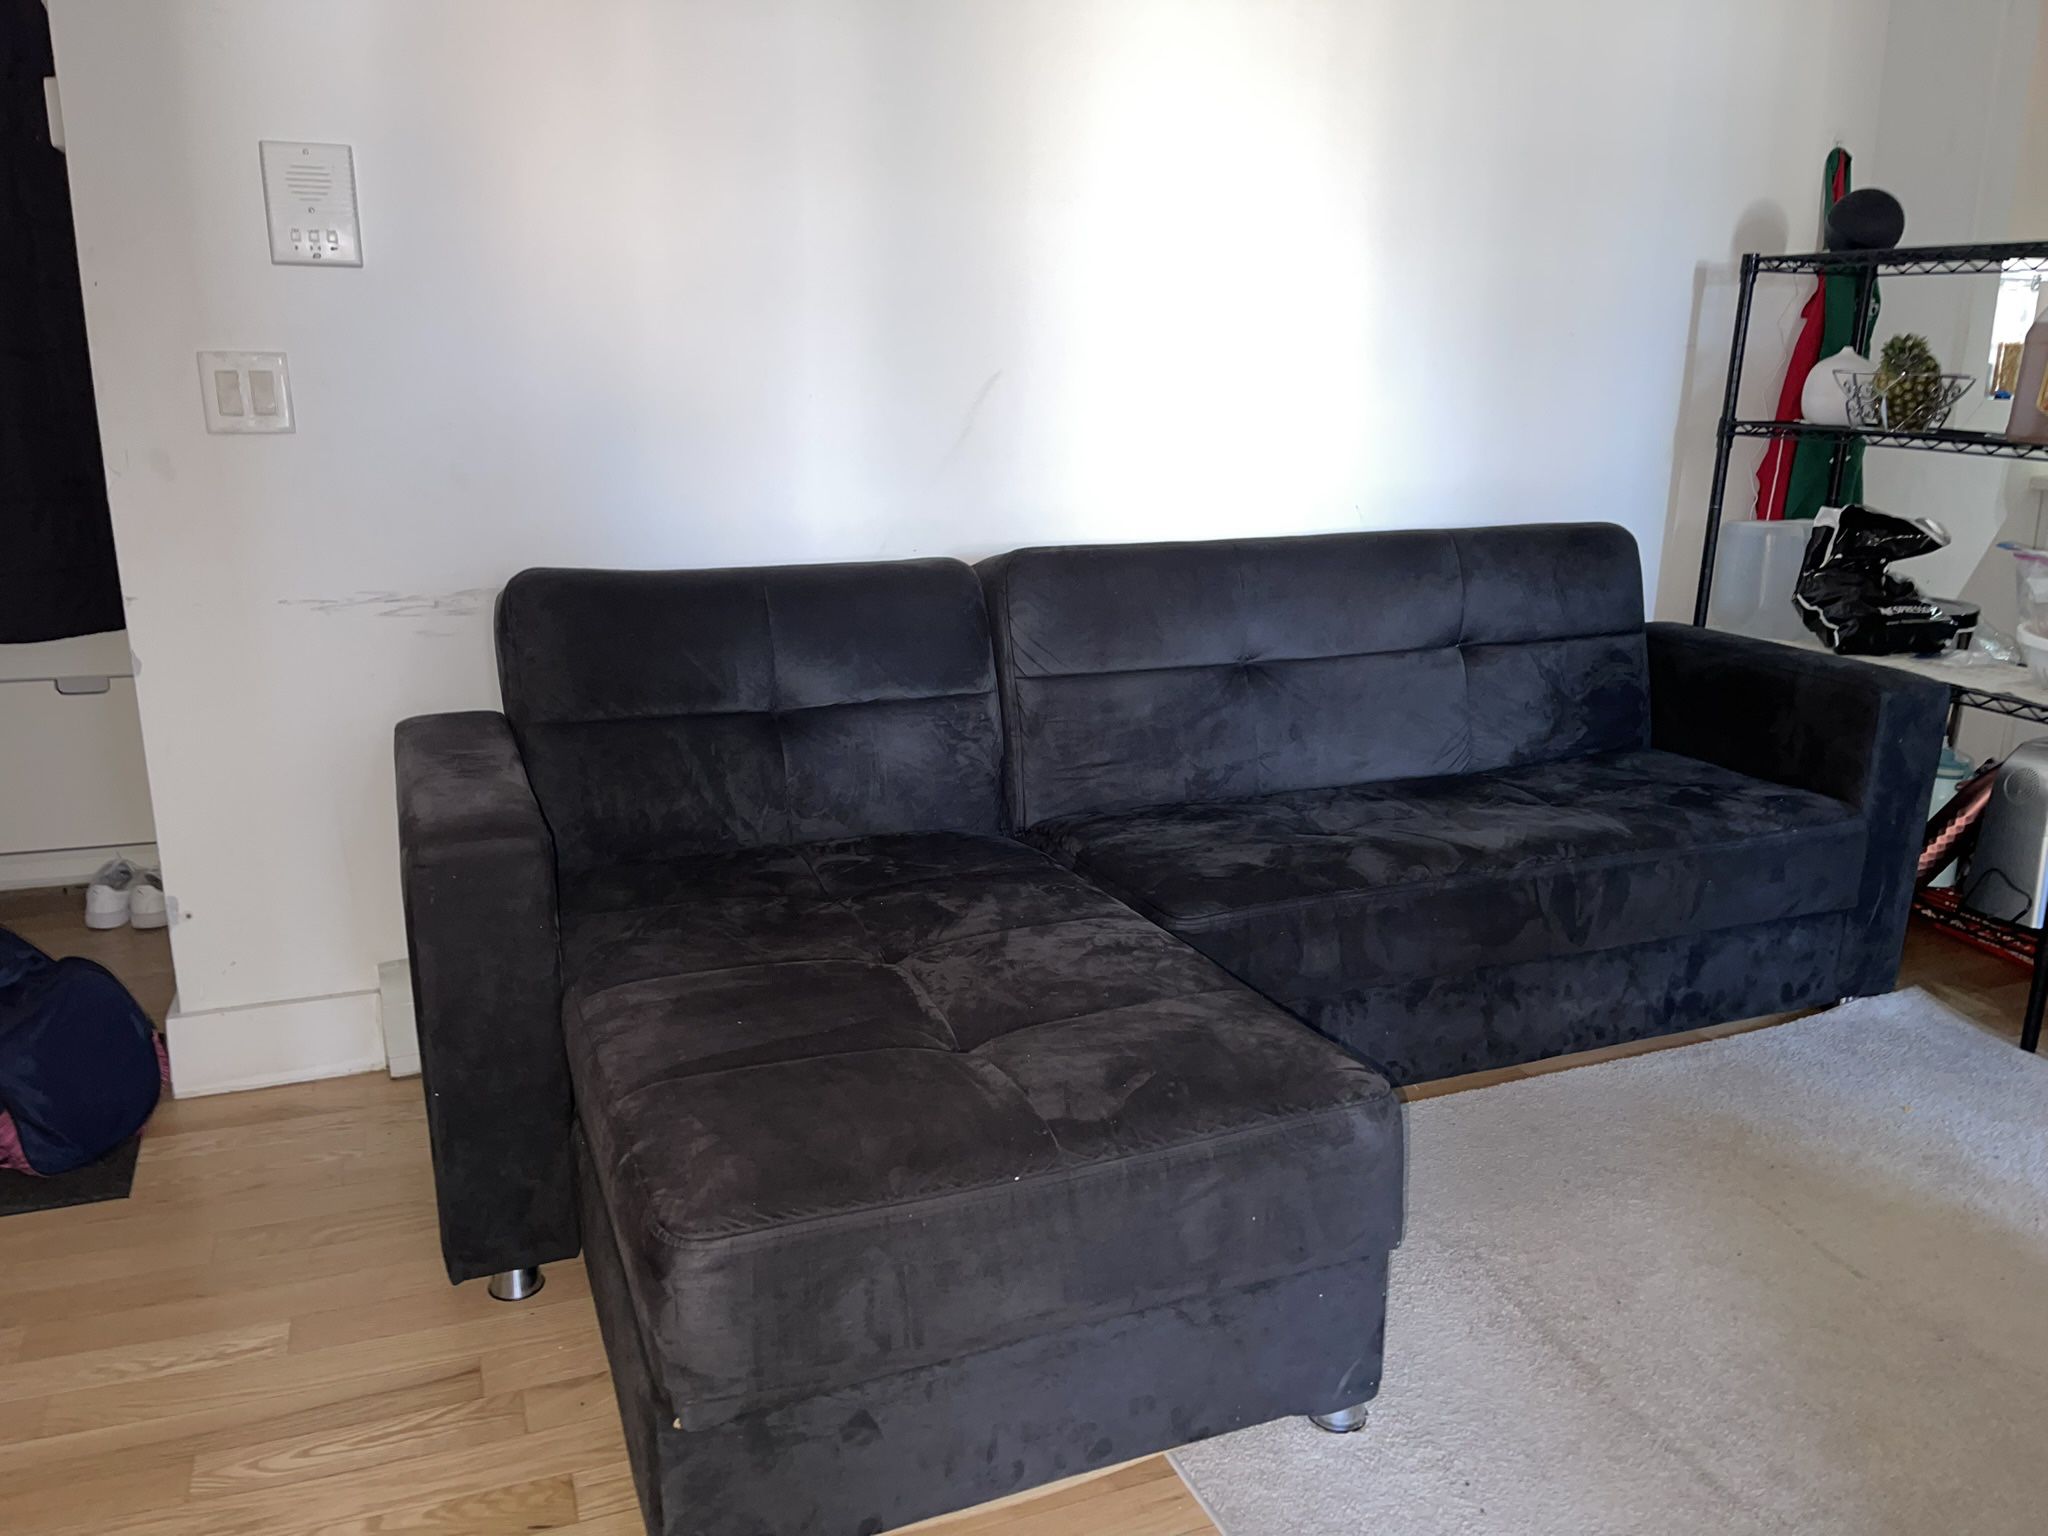 3 Seater Black Sectional (extremely loved) - Available 04/30